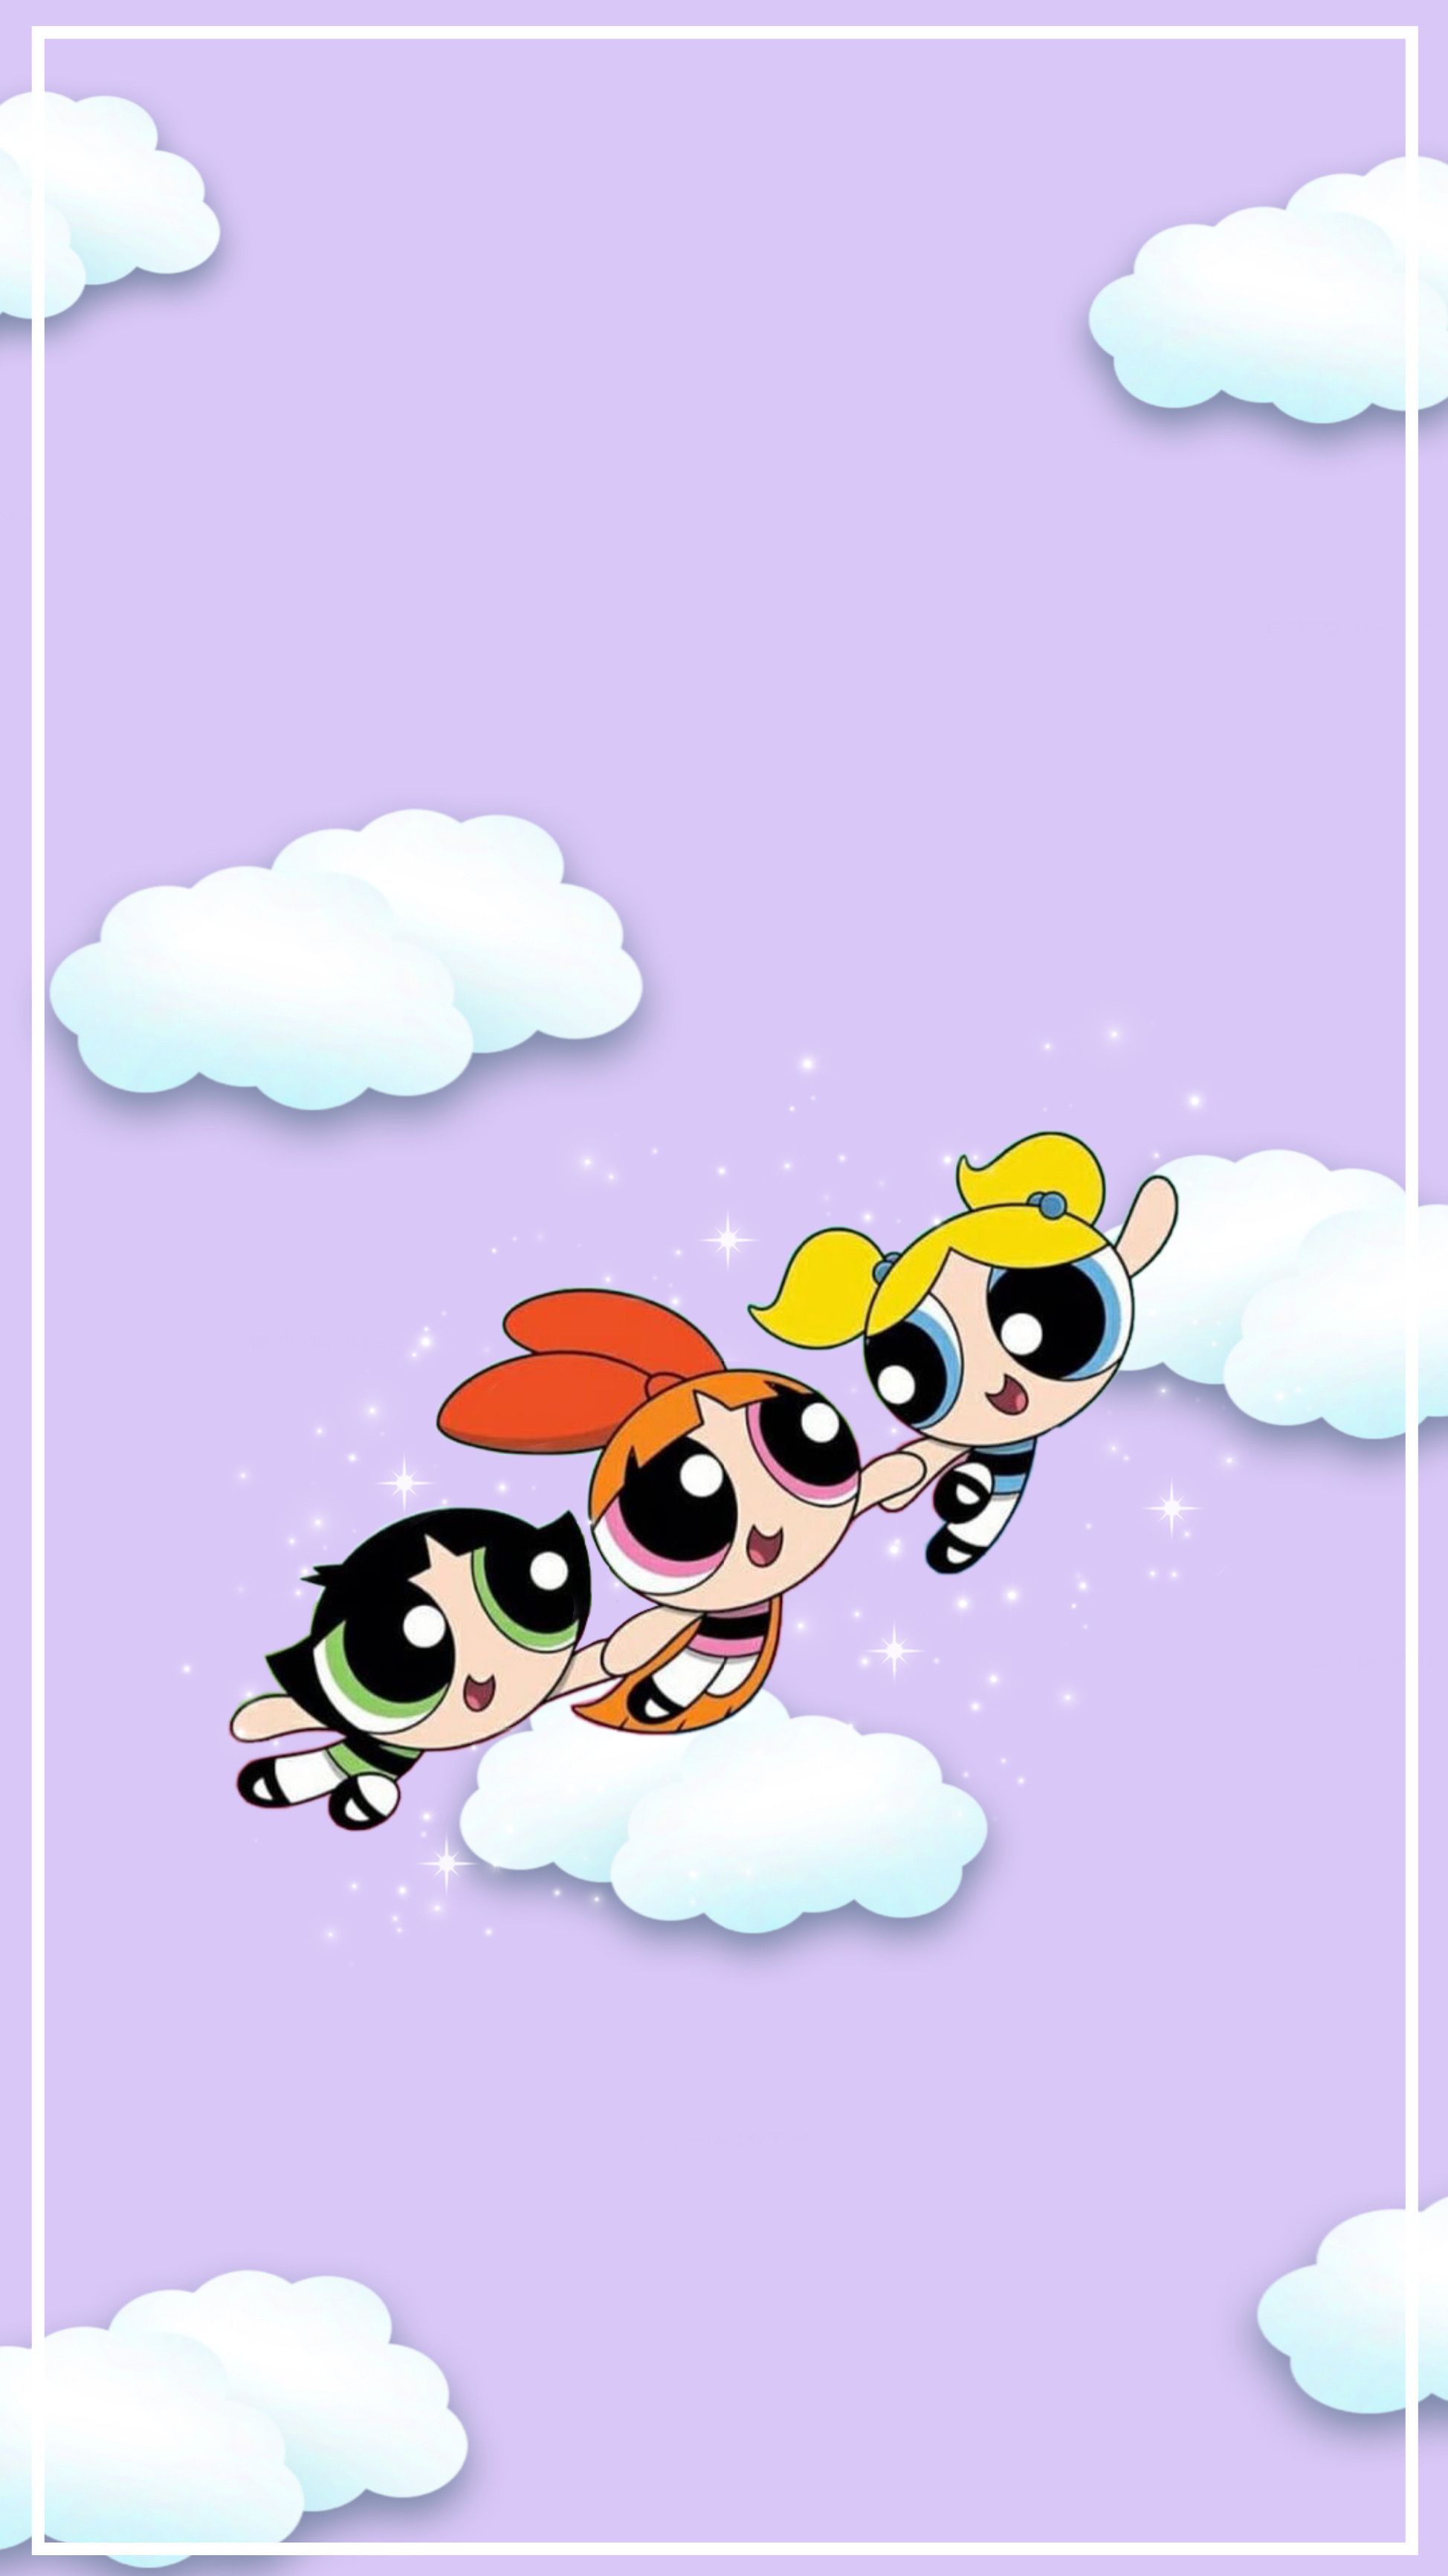 Aesthetic Powerpuff Girls Wallpapers Wallpaper Cave The following tags are aliased to this tag: aesthetic powerpuff girls wallpapers